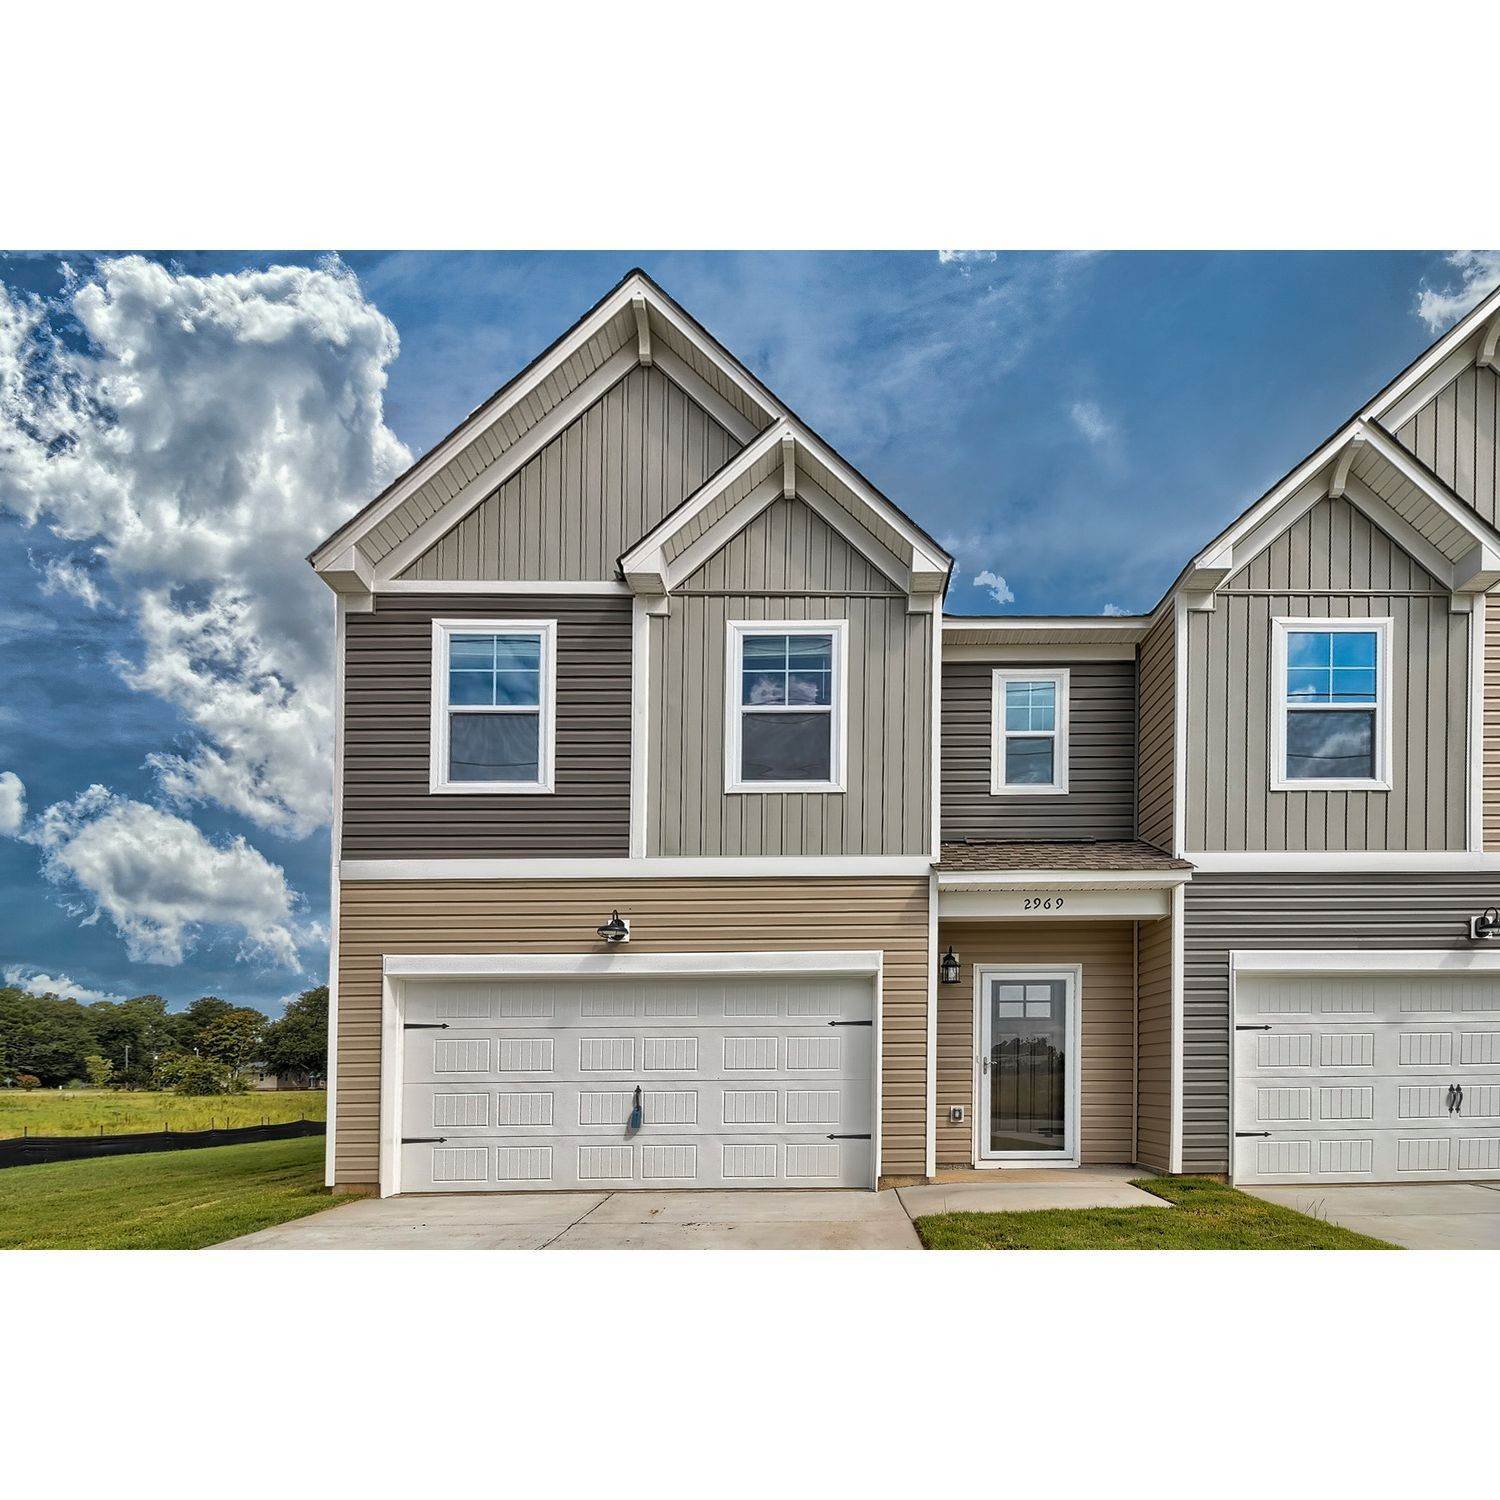 Townhomes at Pocalla Springs κτίριο σε 1788 Snead Drive, Sumter, SC 29154